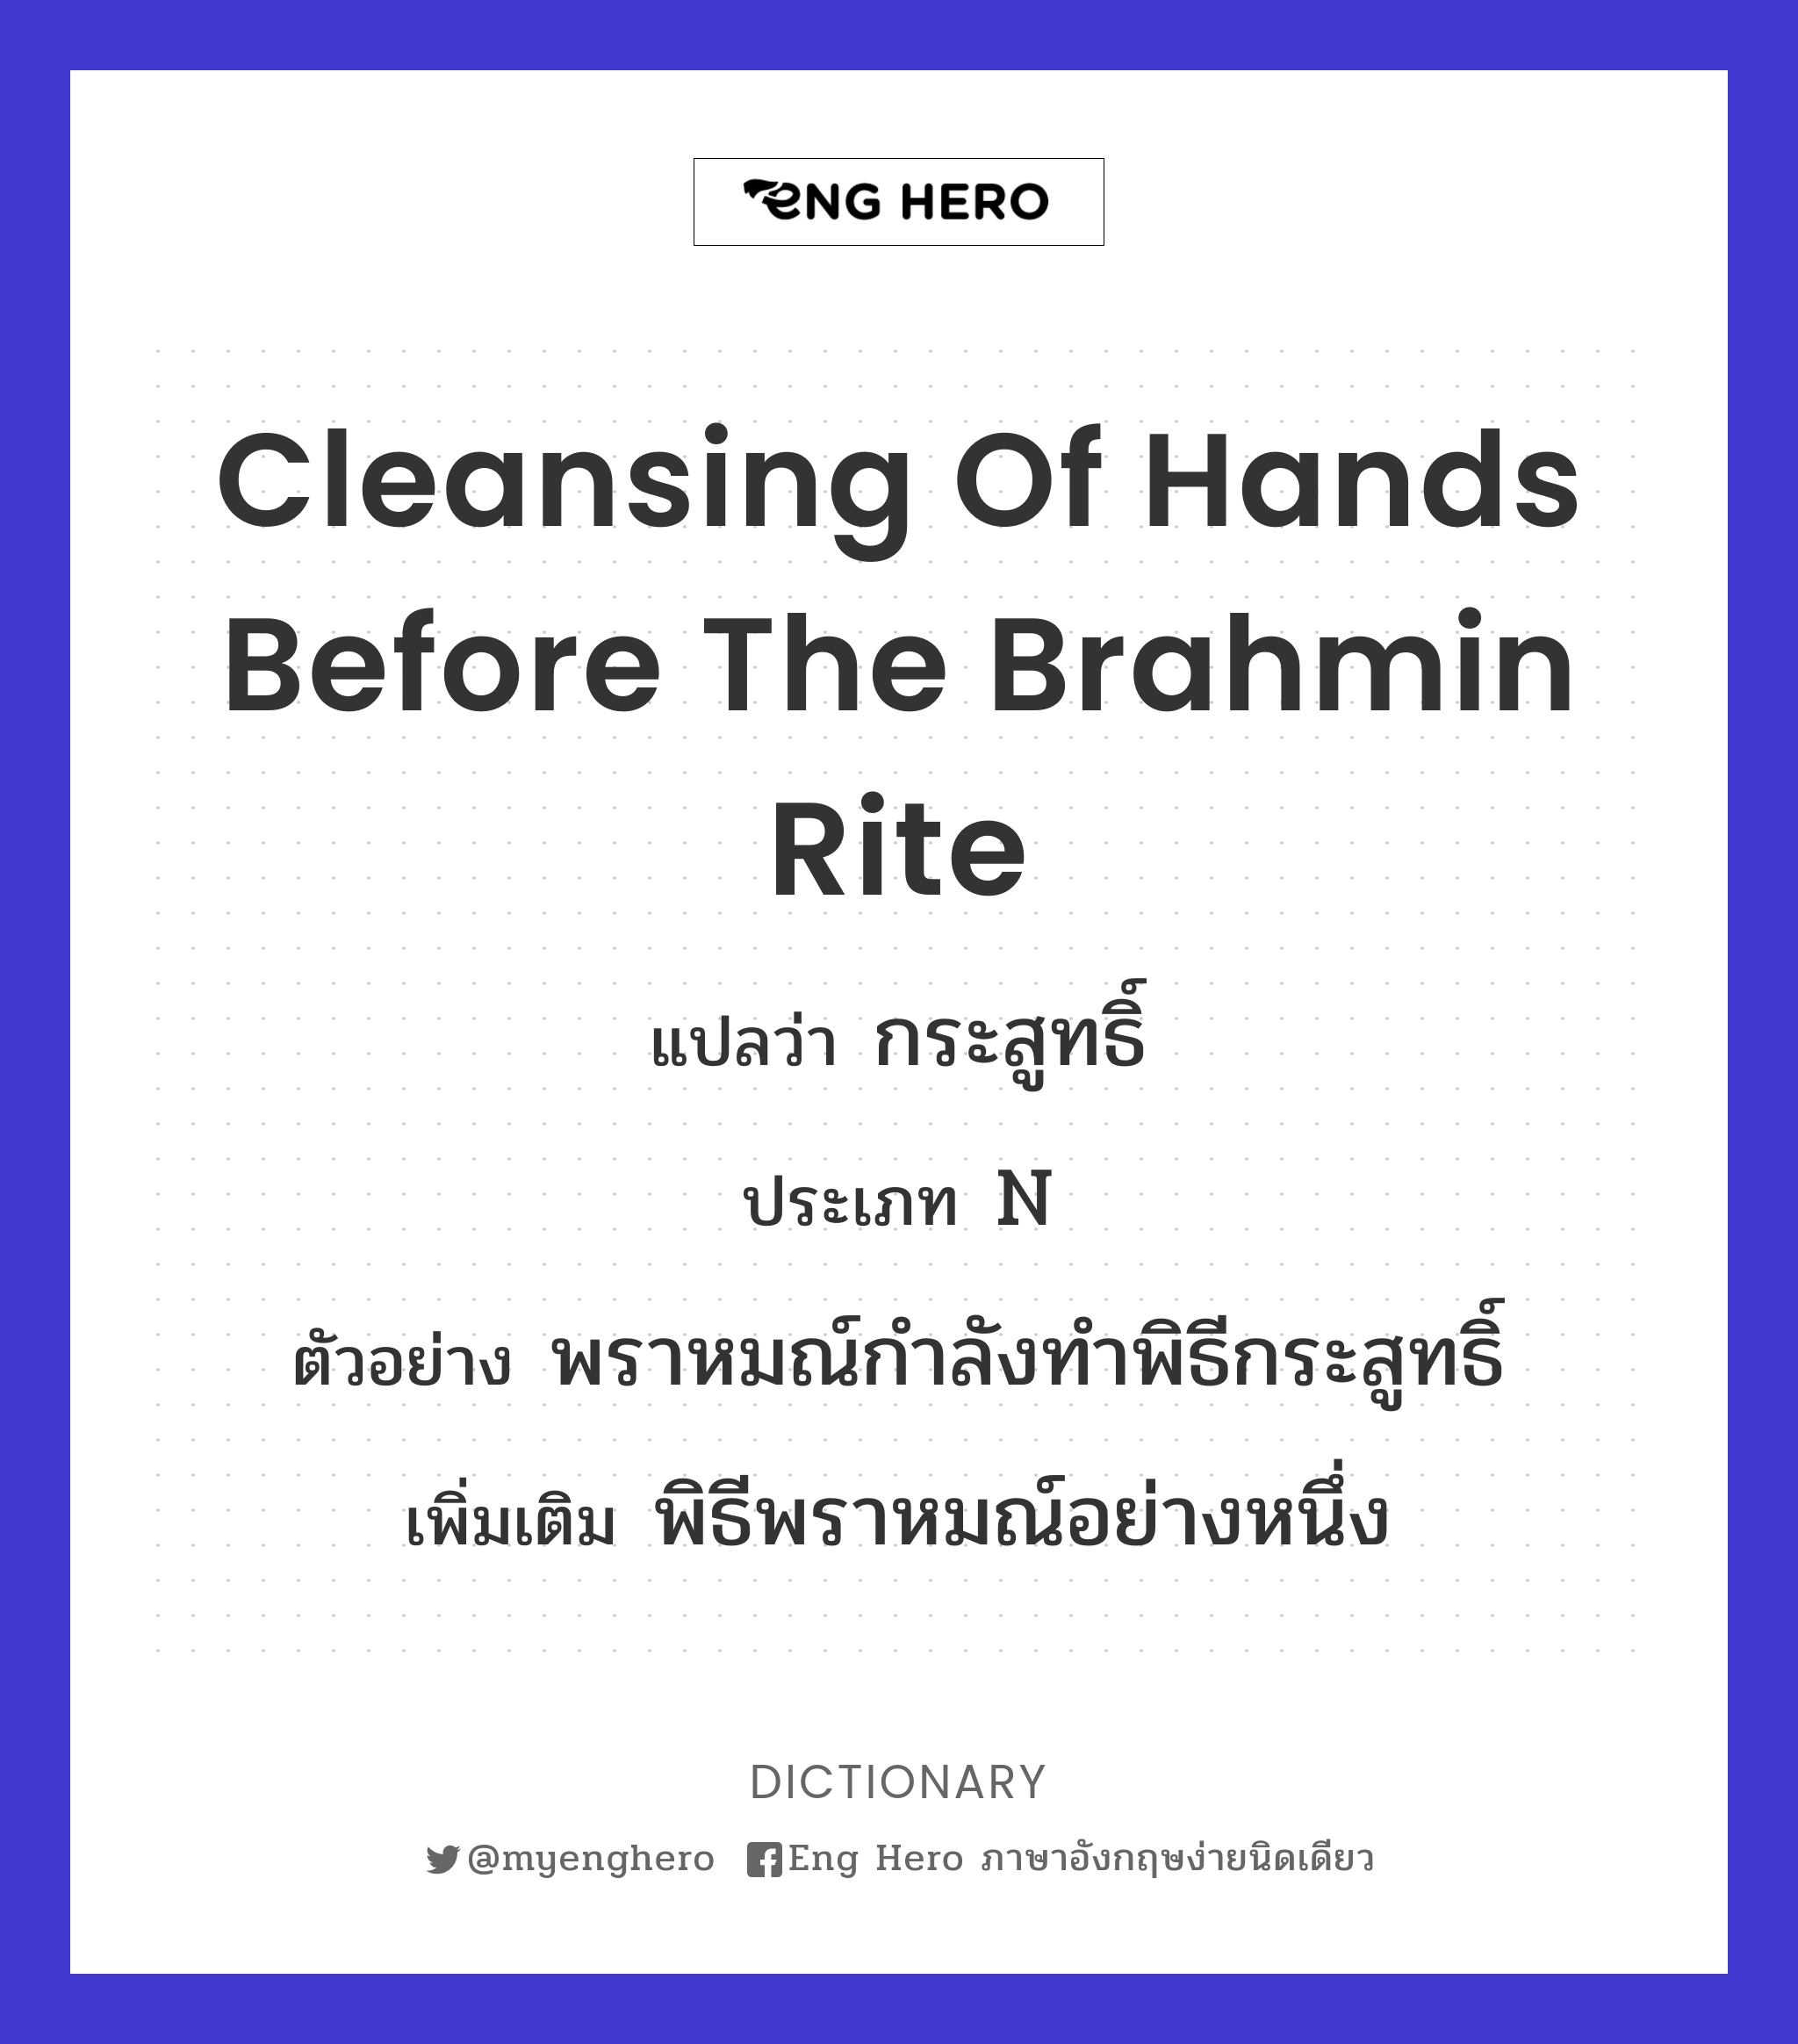 cleansing of hands before the Brahmin rite